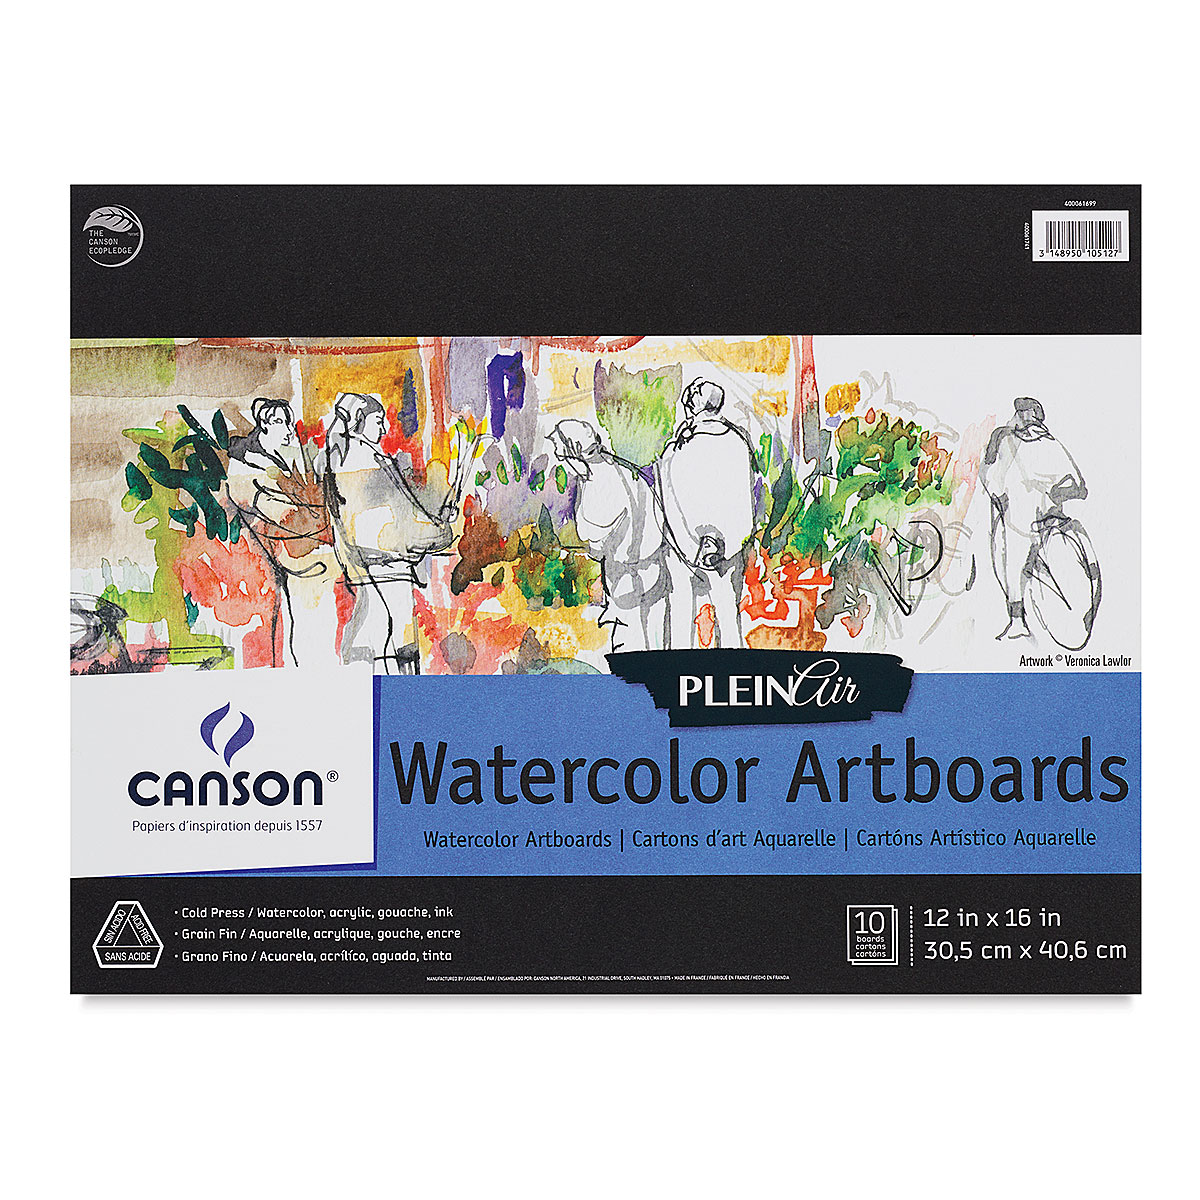 Cheap watercolor support board? - WetCanvas: Online Living for Artists